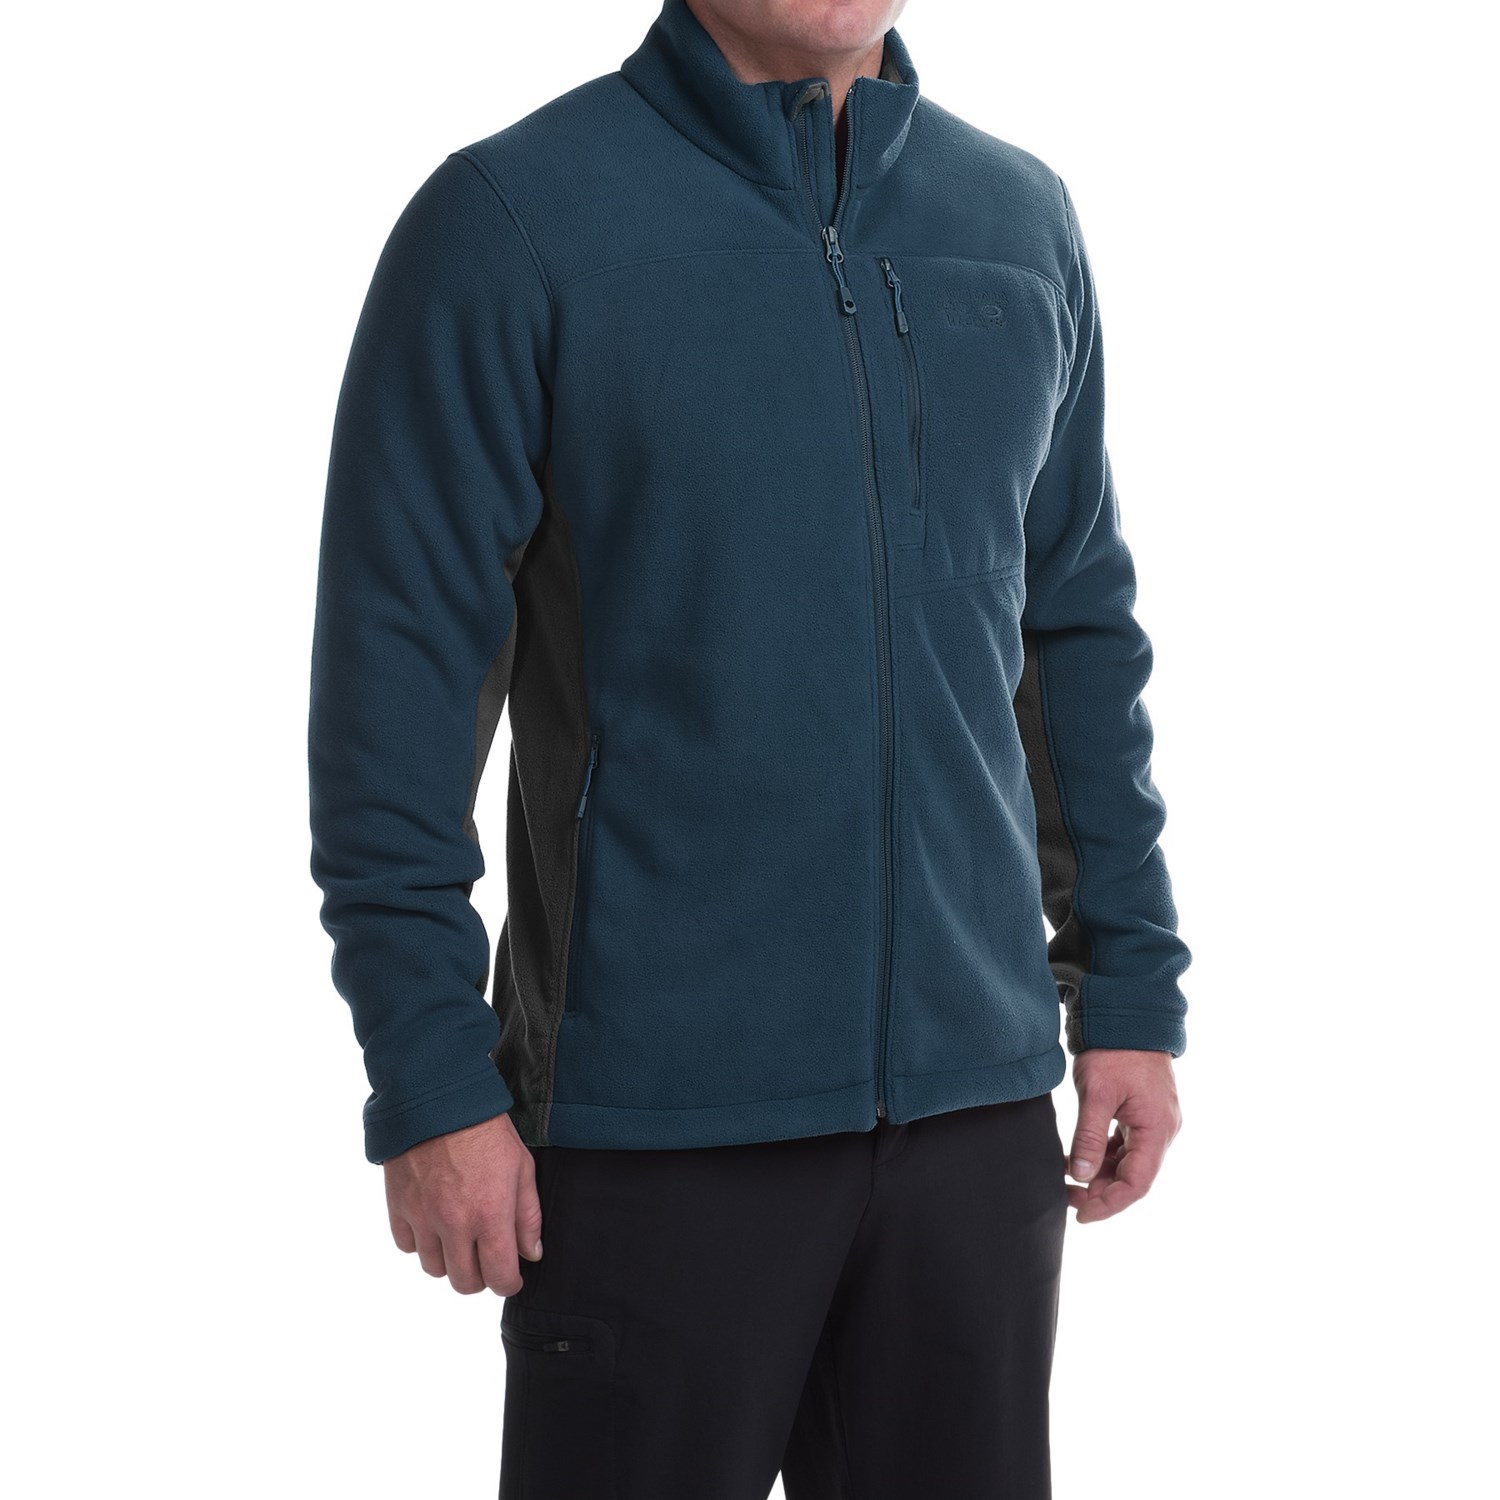 Best mid-weight fleece jacket anywhere - Review of Mountain